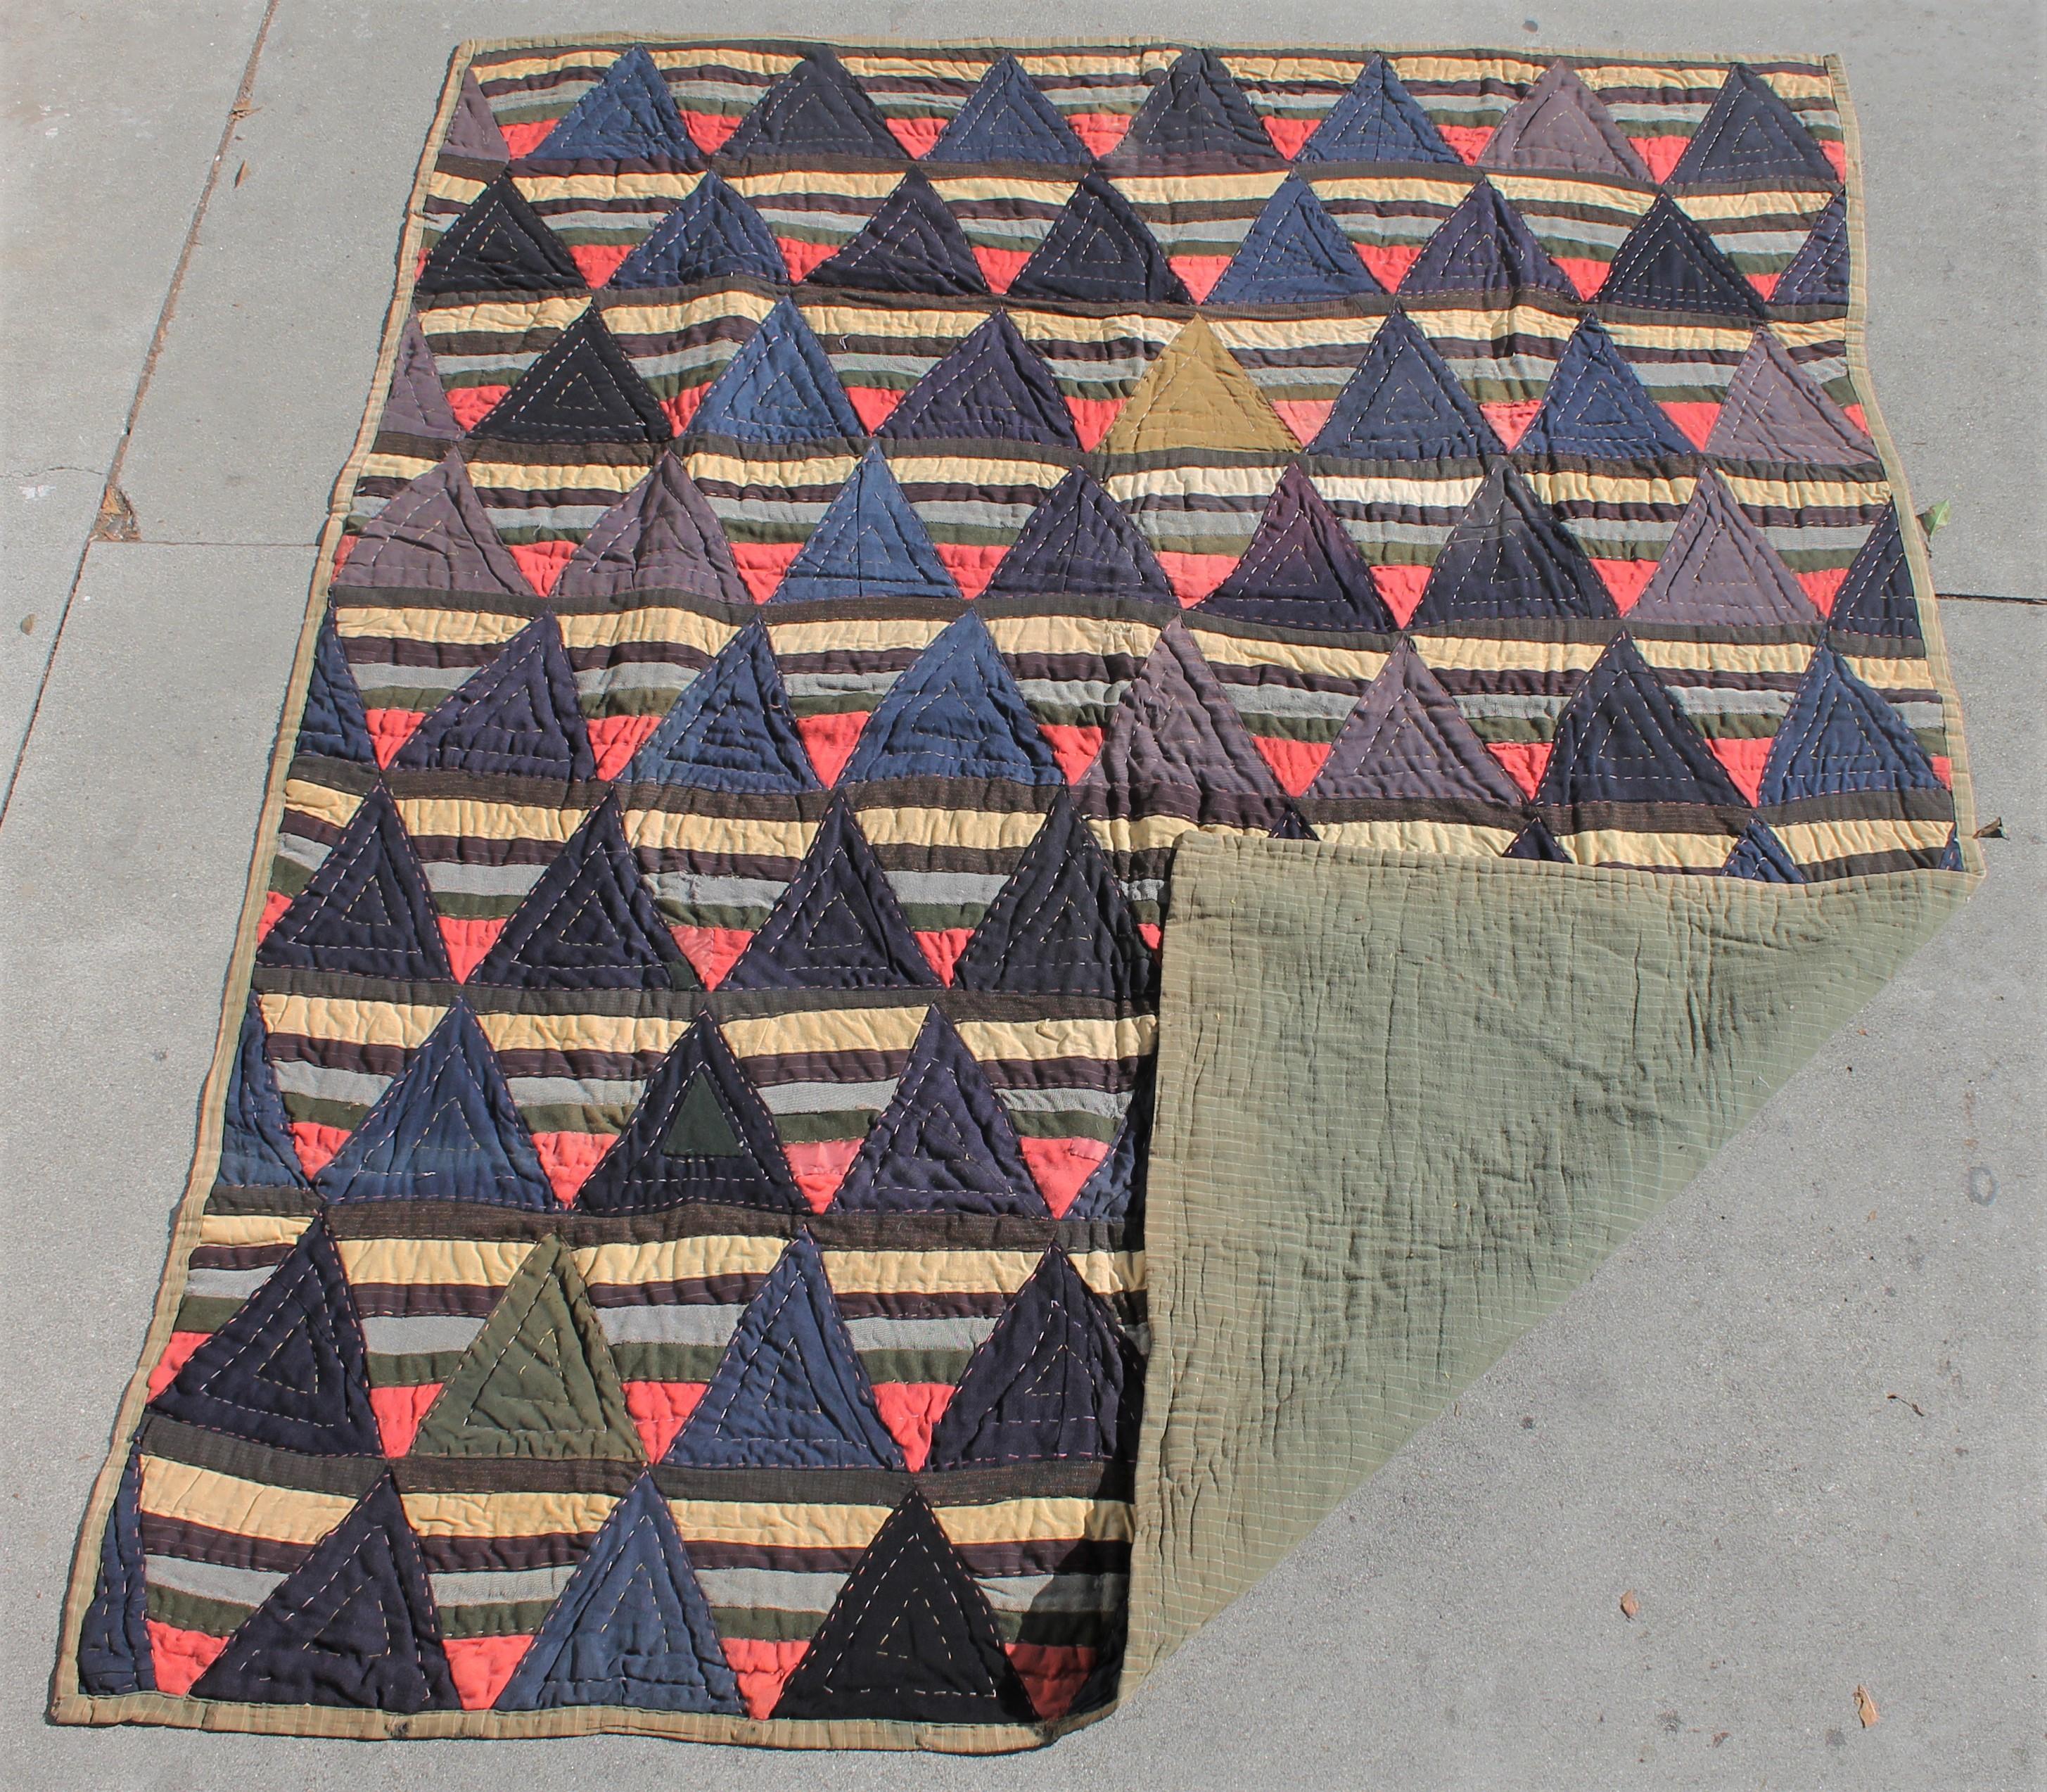 Afro American wool strips quilt. The pattern is roman stripes. This is a folk art quilt with rough quilting and is a crude quilt with crude piecing. Typical of an Afro American Quilt.